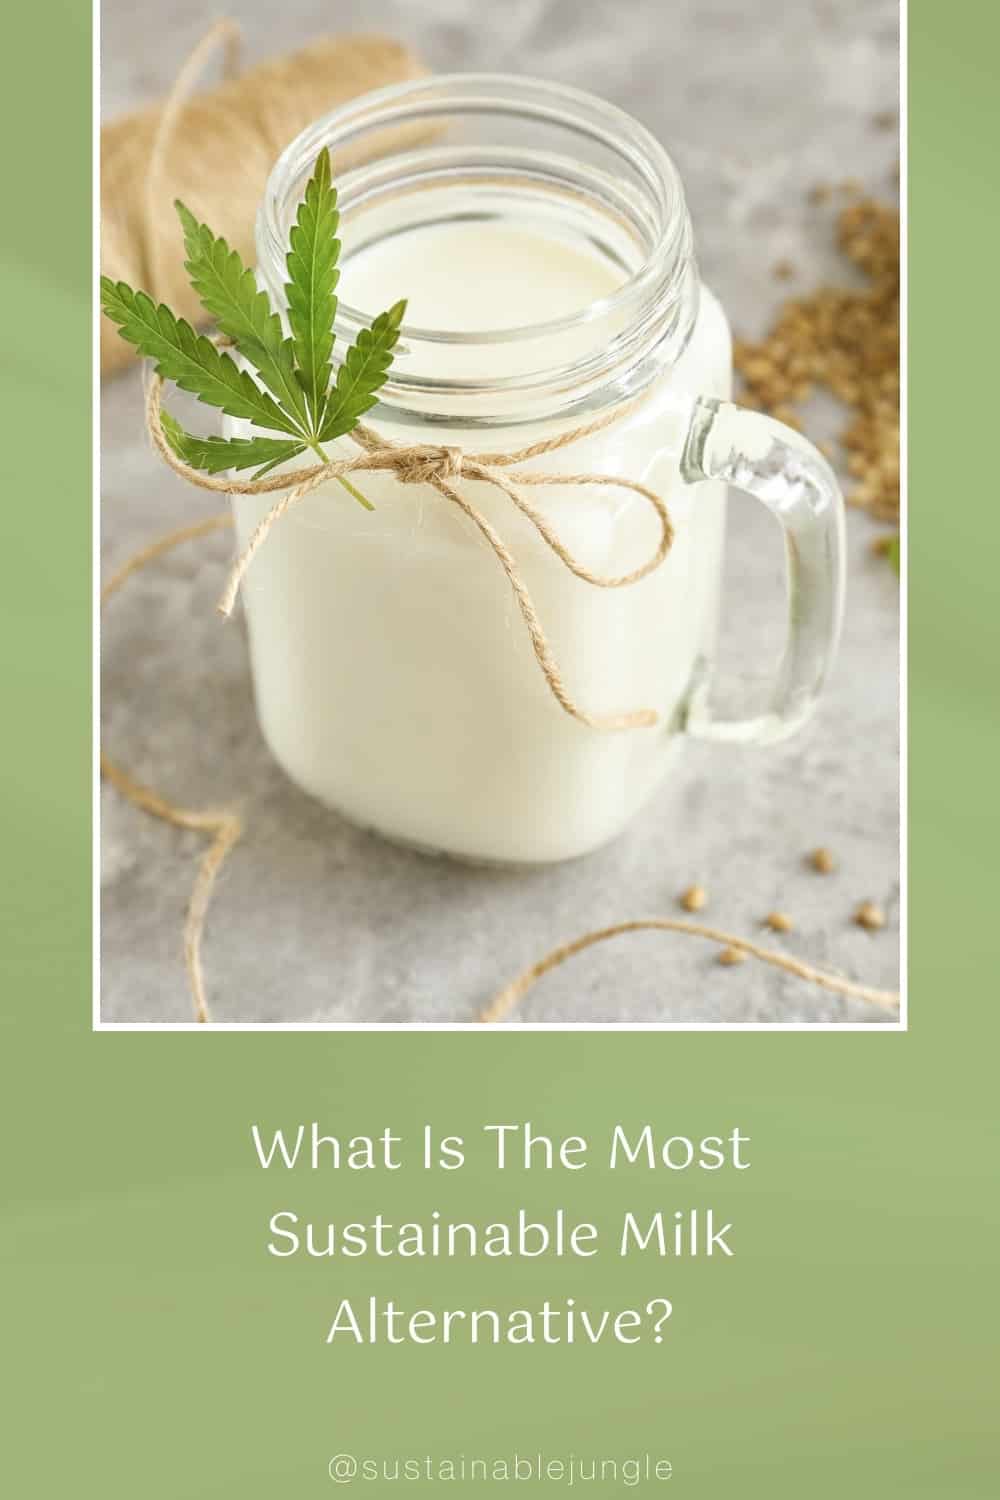 What Is The Most Sustainable Milk Alternative? #mostsustainablemilk #mostsustainablemilkalternatives #whatisthemostsustainablemilk? #mostsustainableplantmilk #mostsustainableveganmilk #bestsustainablemilkalternative #mostenvironmentallyfriendlymilk #bestecofriendlymilk #mostethicalmilk #sustainablejungle Image by pixelshot via Canva Pro